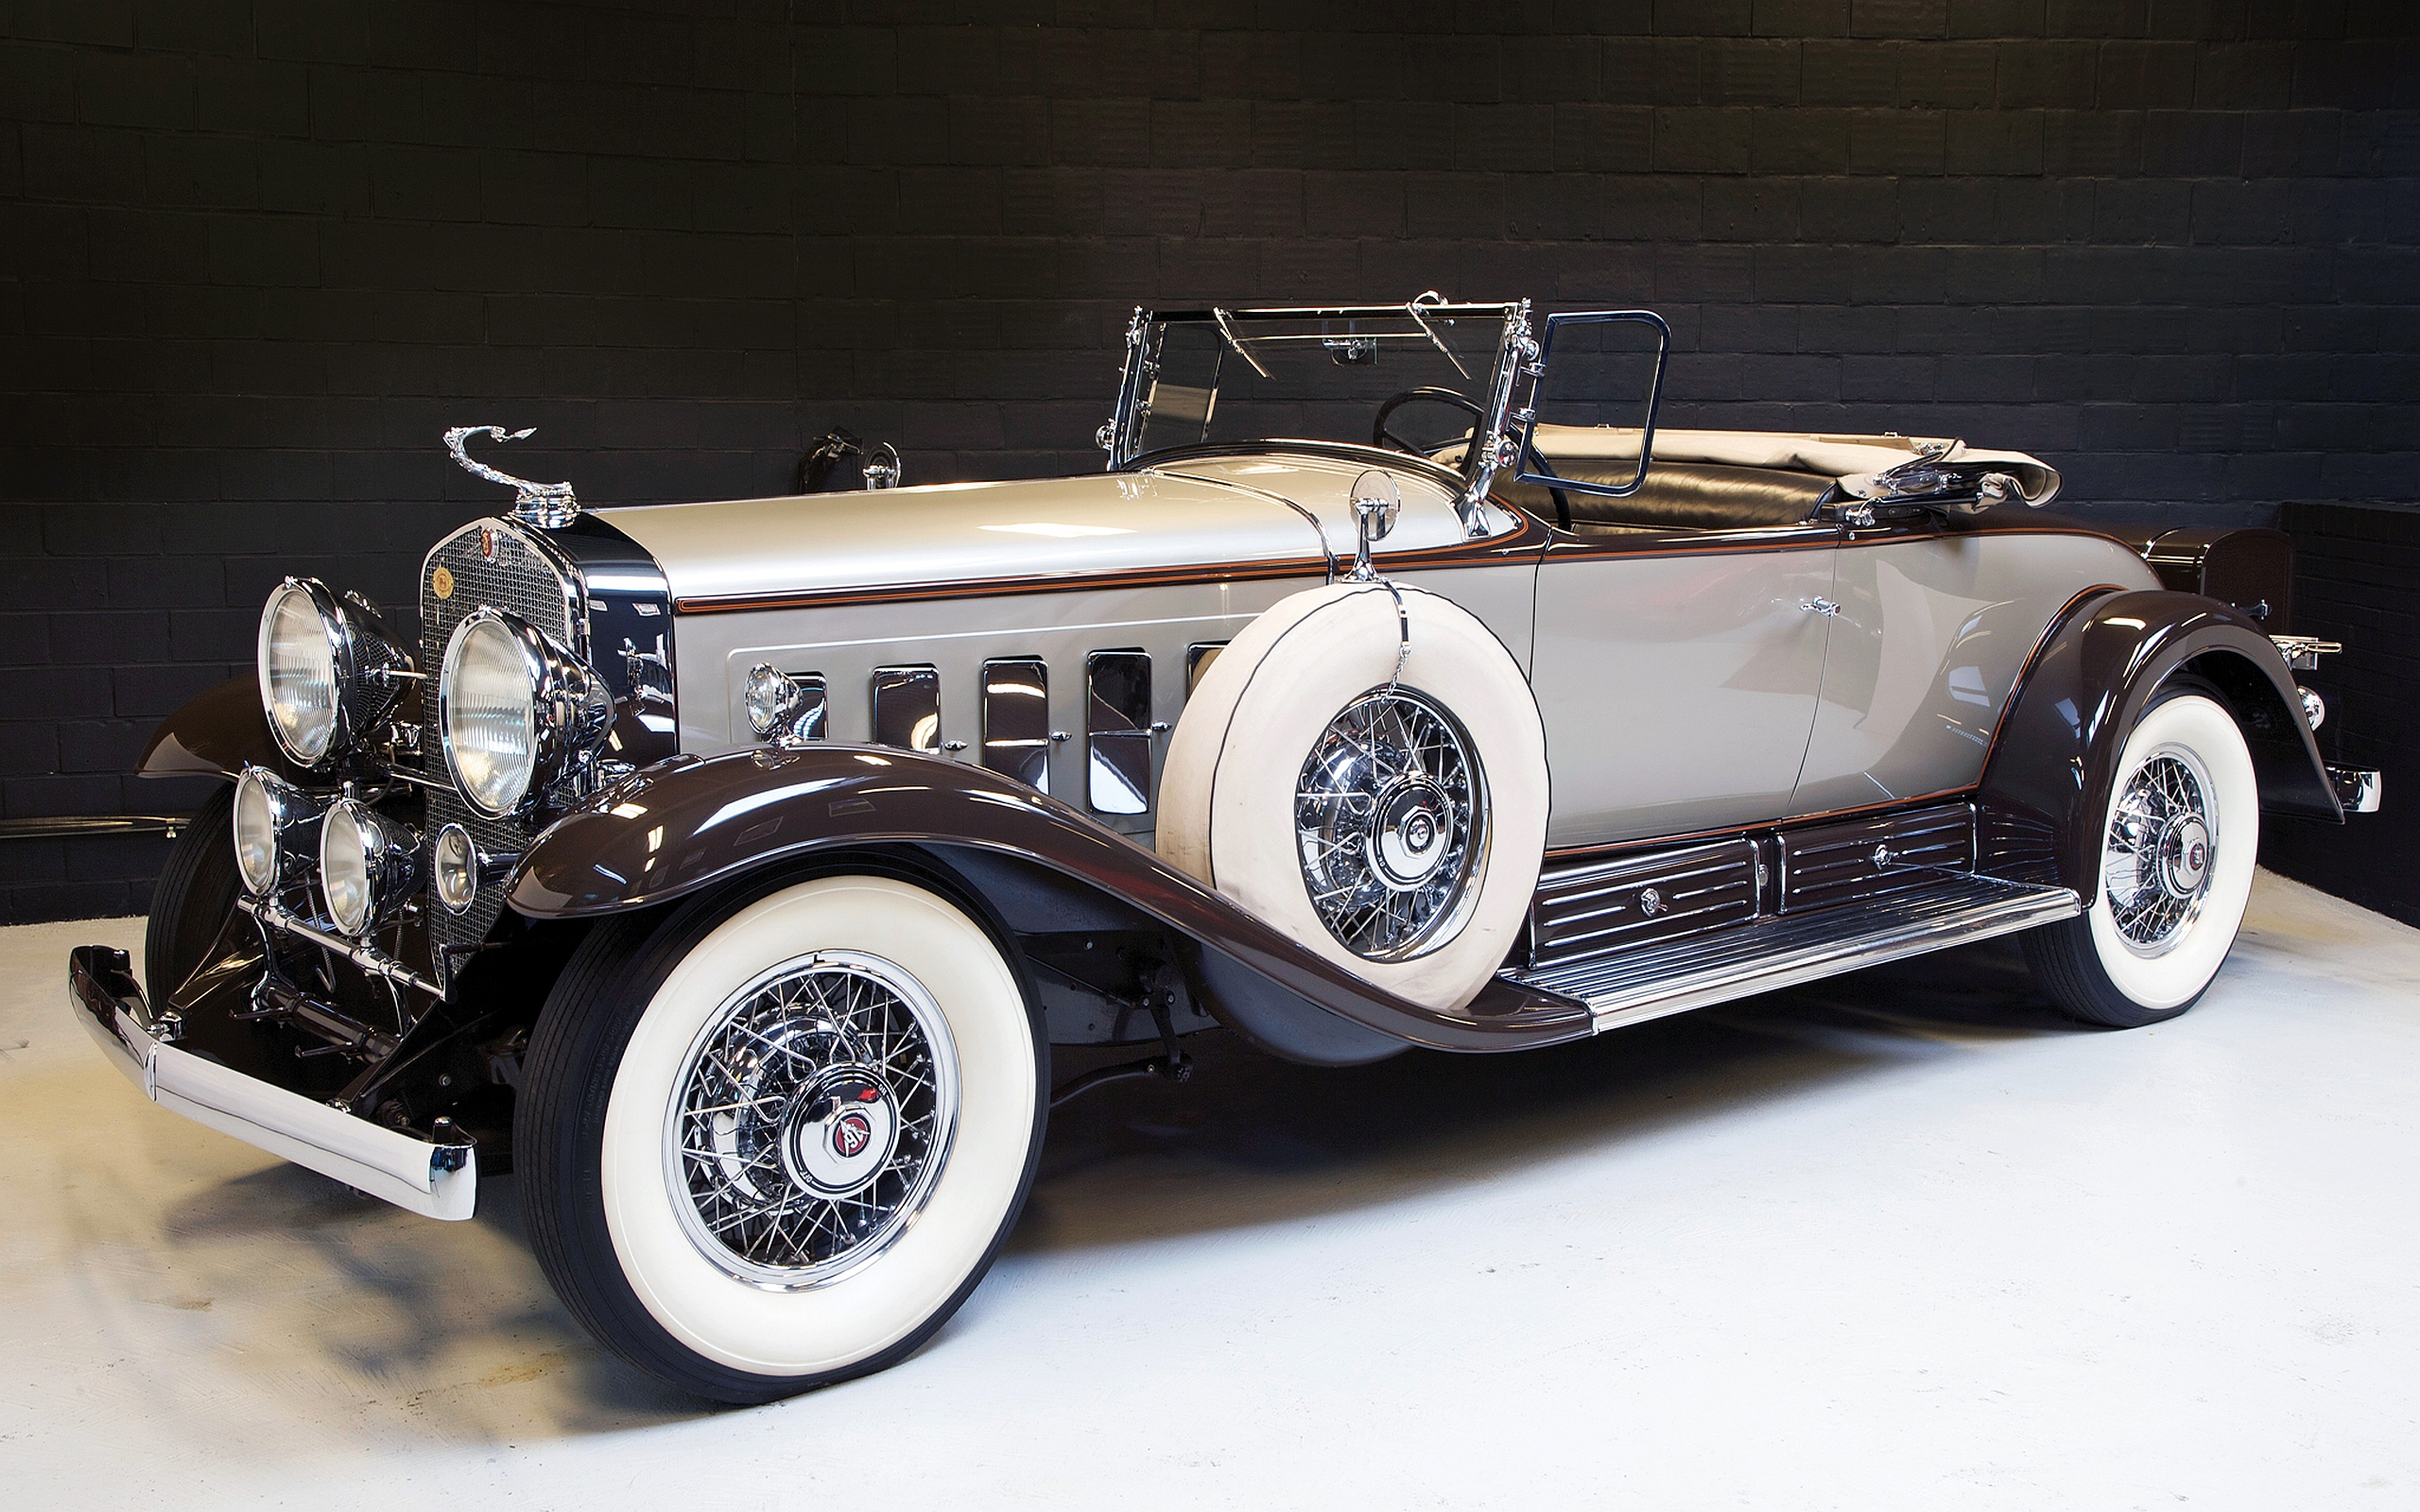 Amazing Cadillac V16 Pictures & Backgrounds